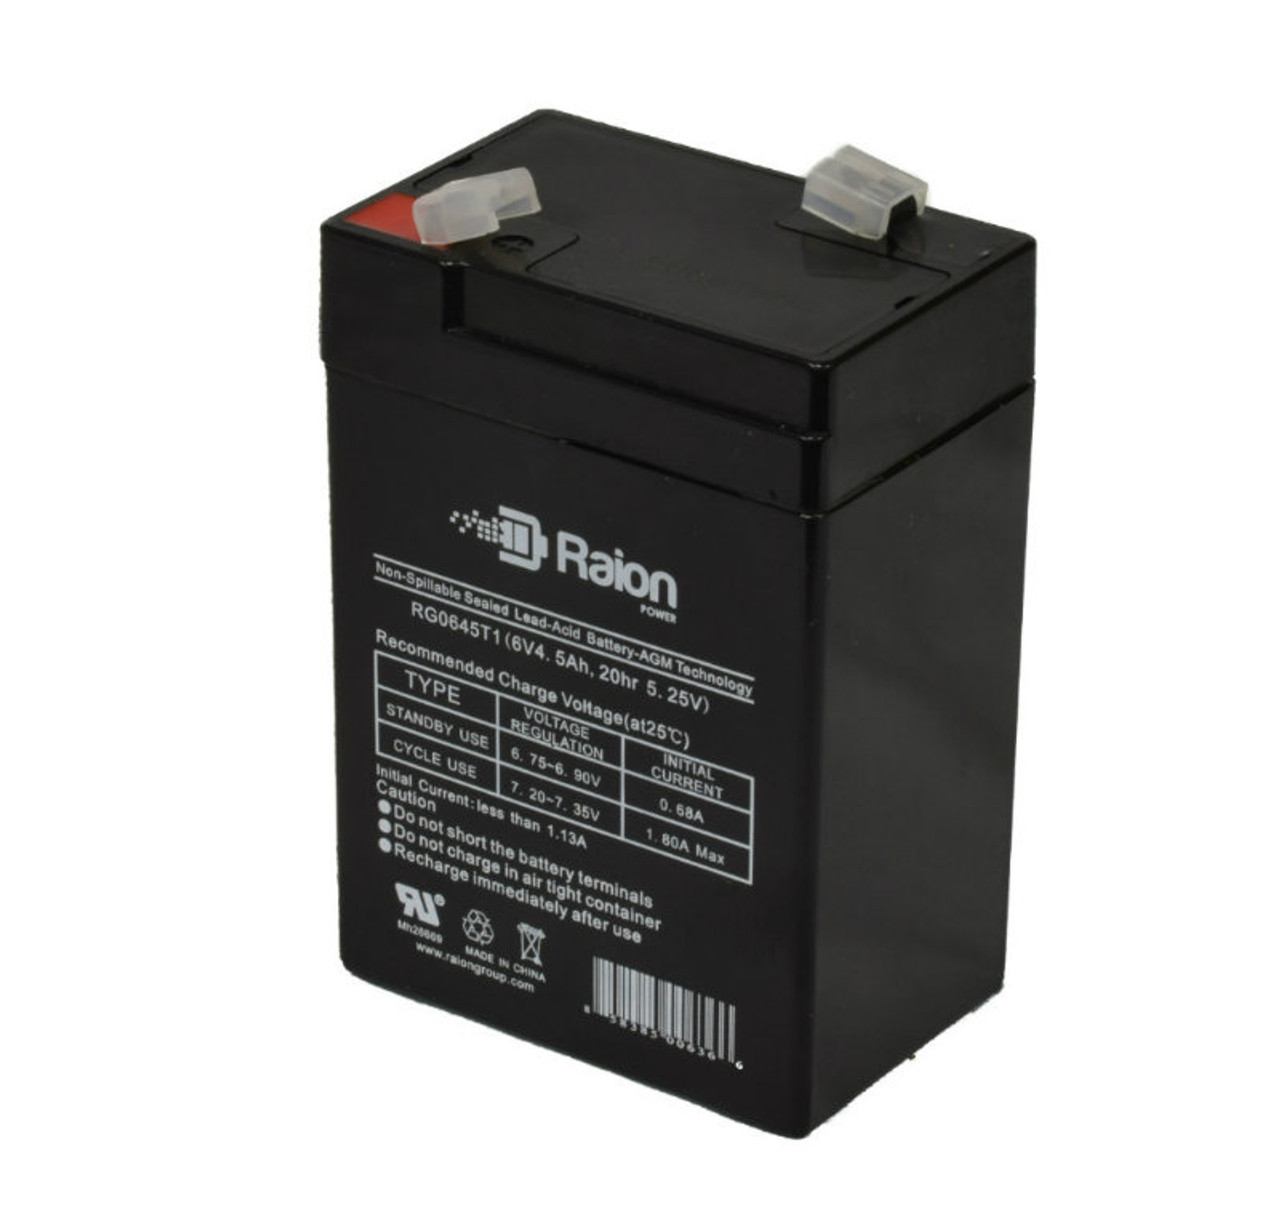 Raion Power RG0645T1 6V 4.5Ah Replacement Battery Cartridge for KAGE MF6V5Ah